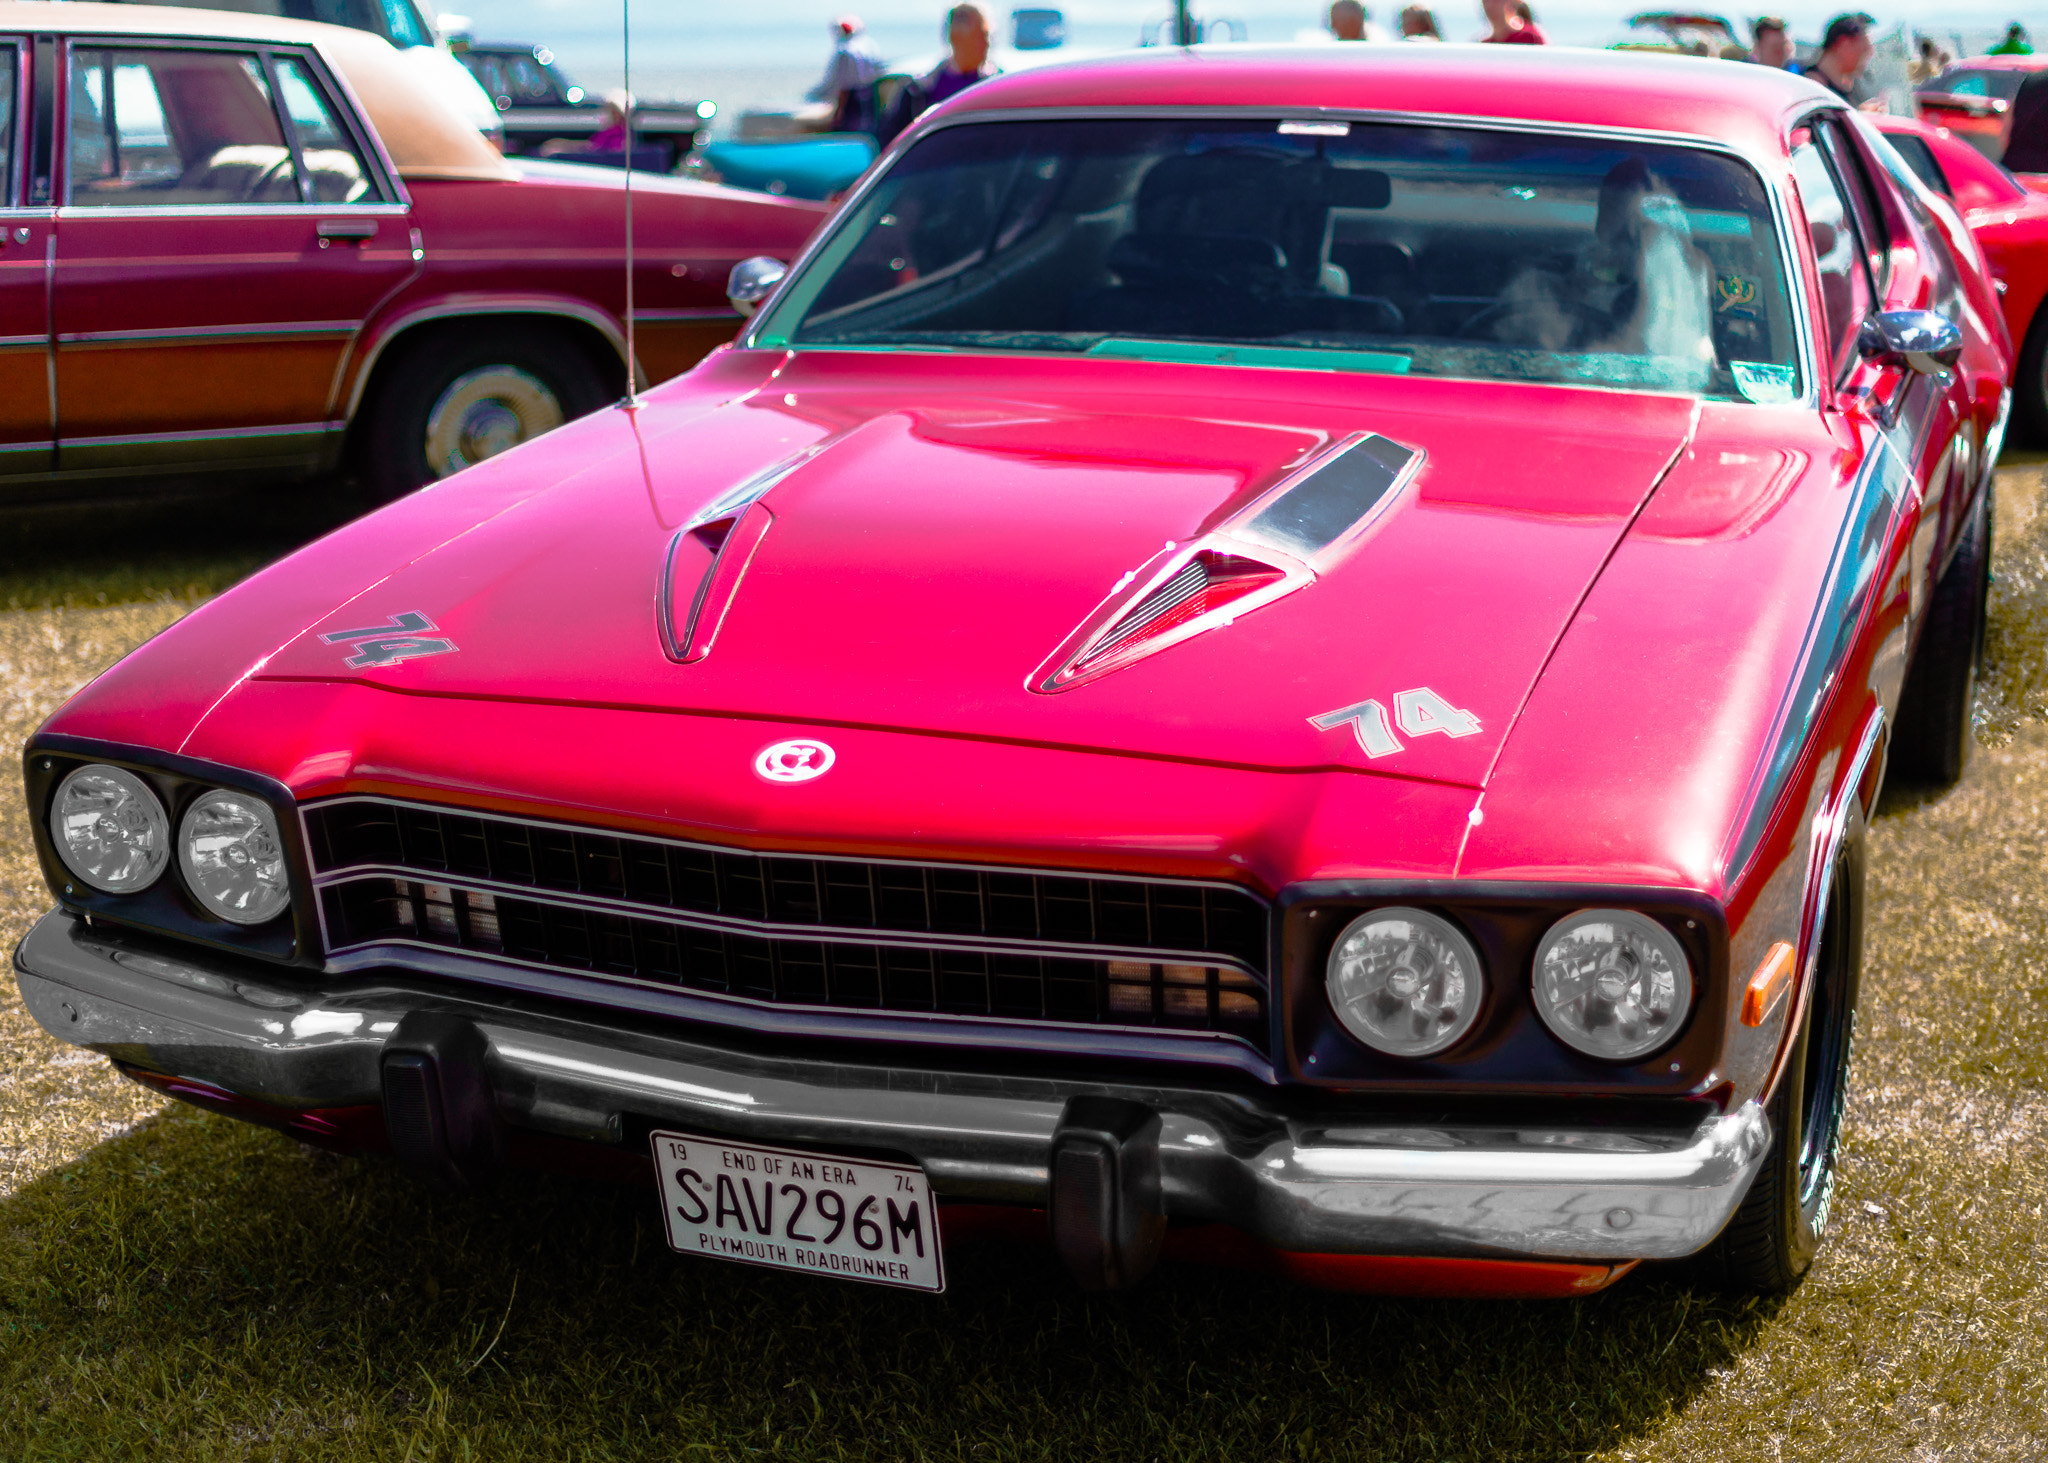 Sony a7 sample photo. Plymouth roadrunner photography